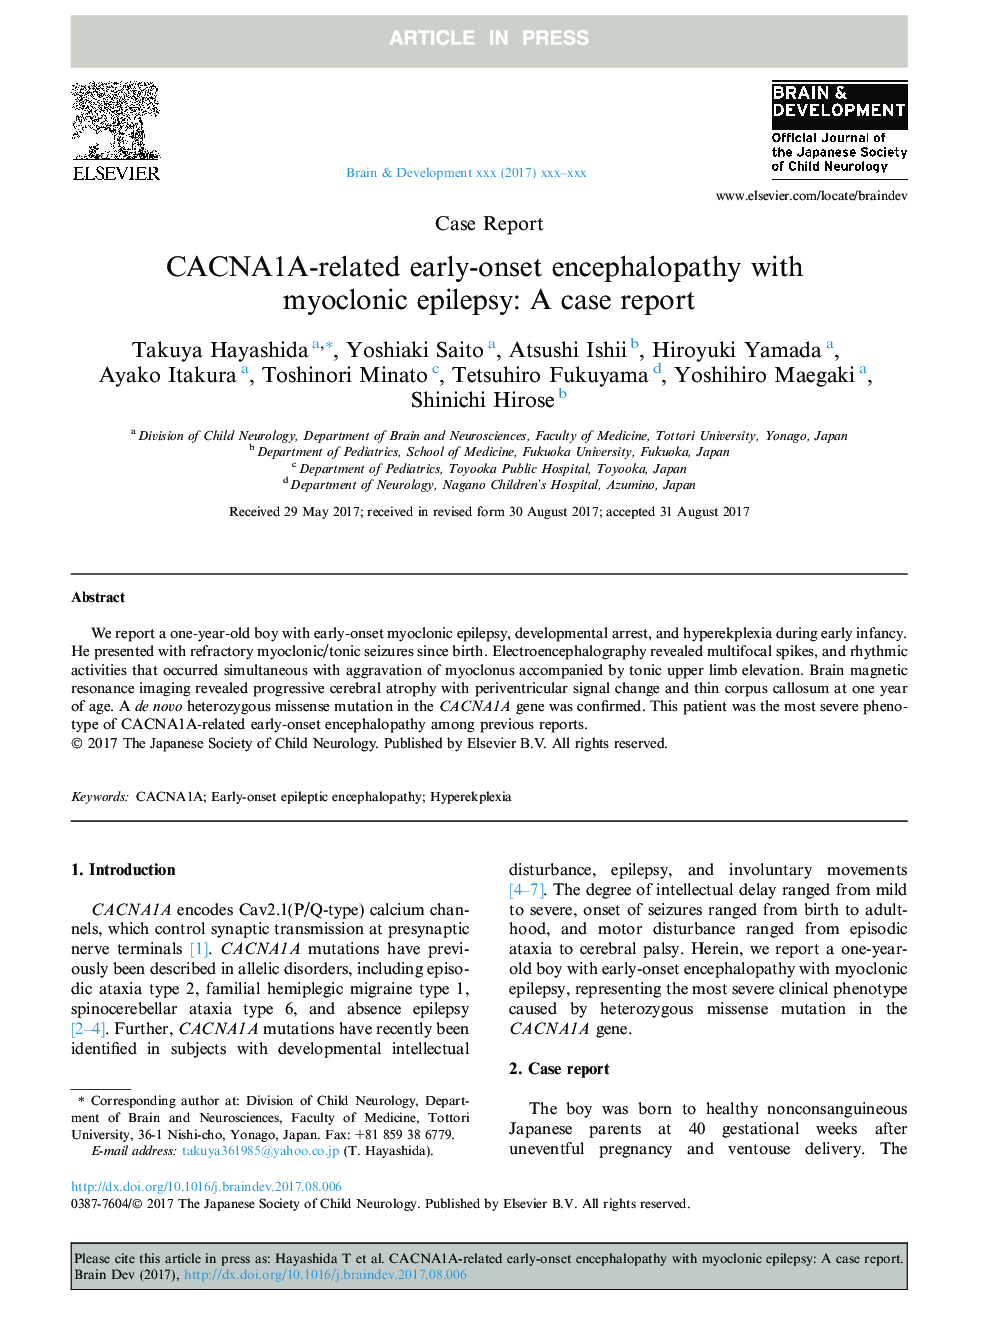 CACNA1A-related early-onset encephalopathy with myoclonic epilepsy: A case report